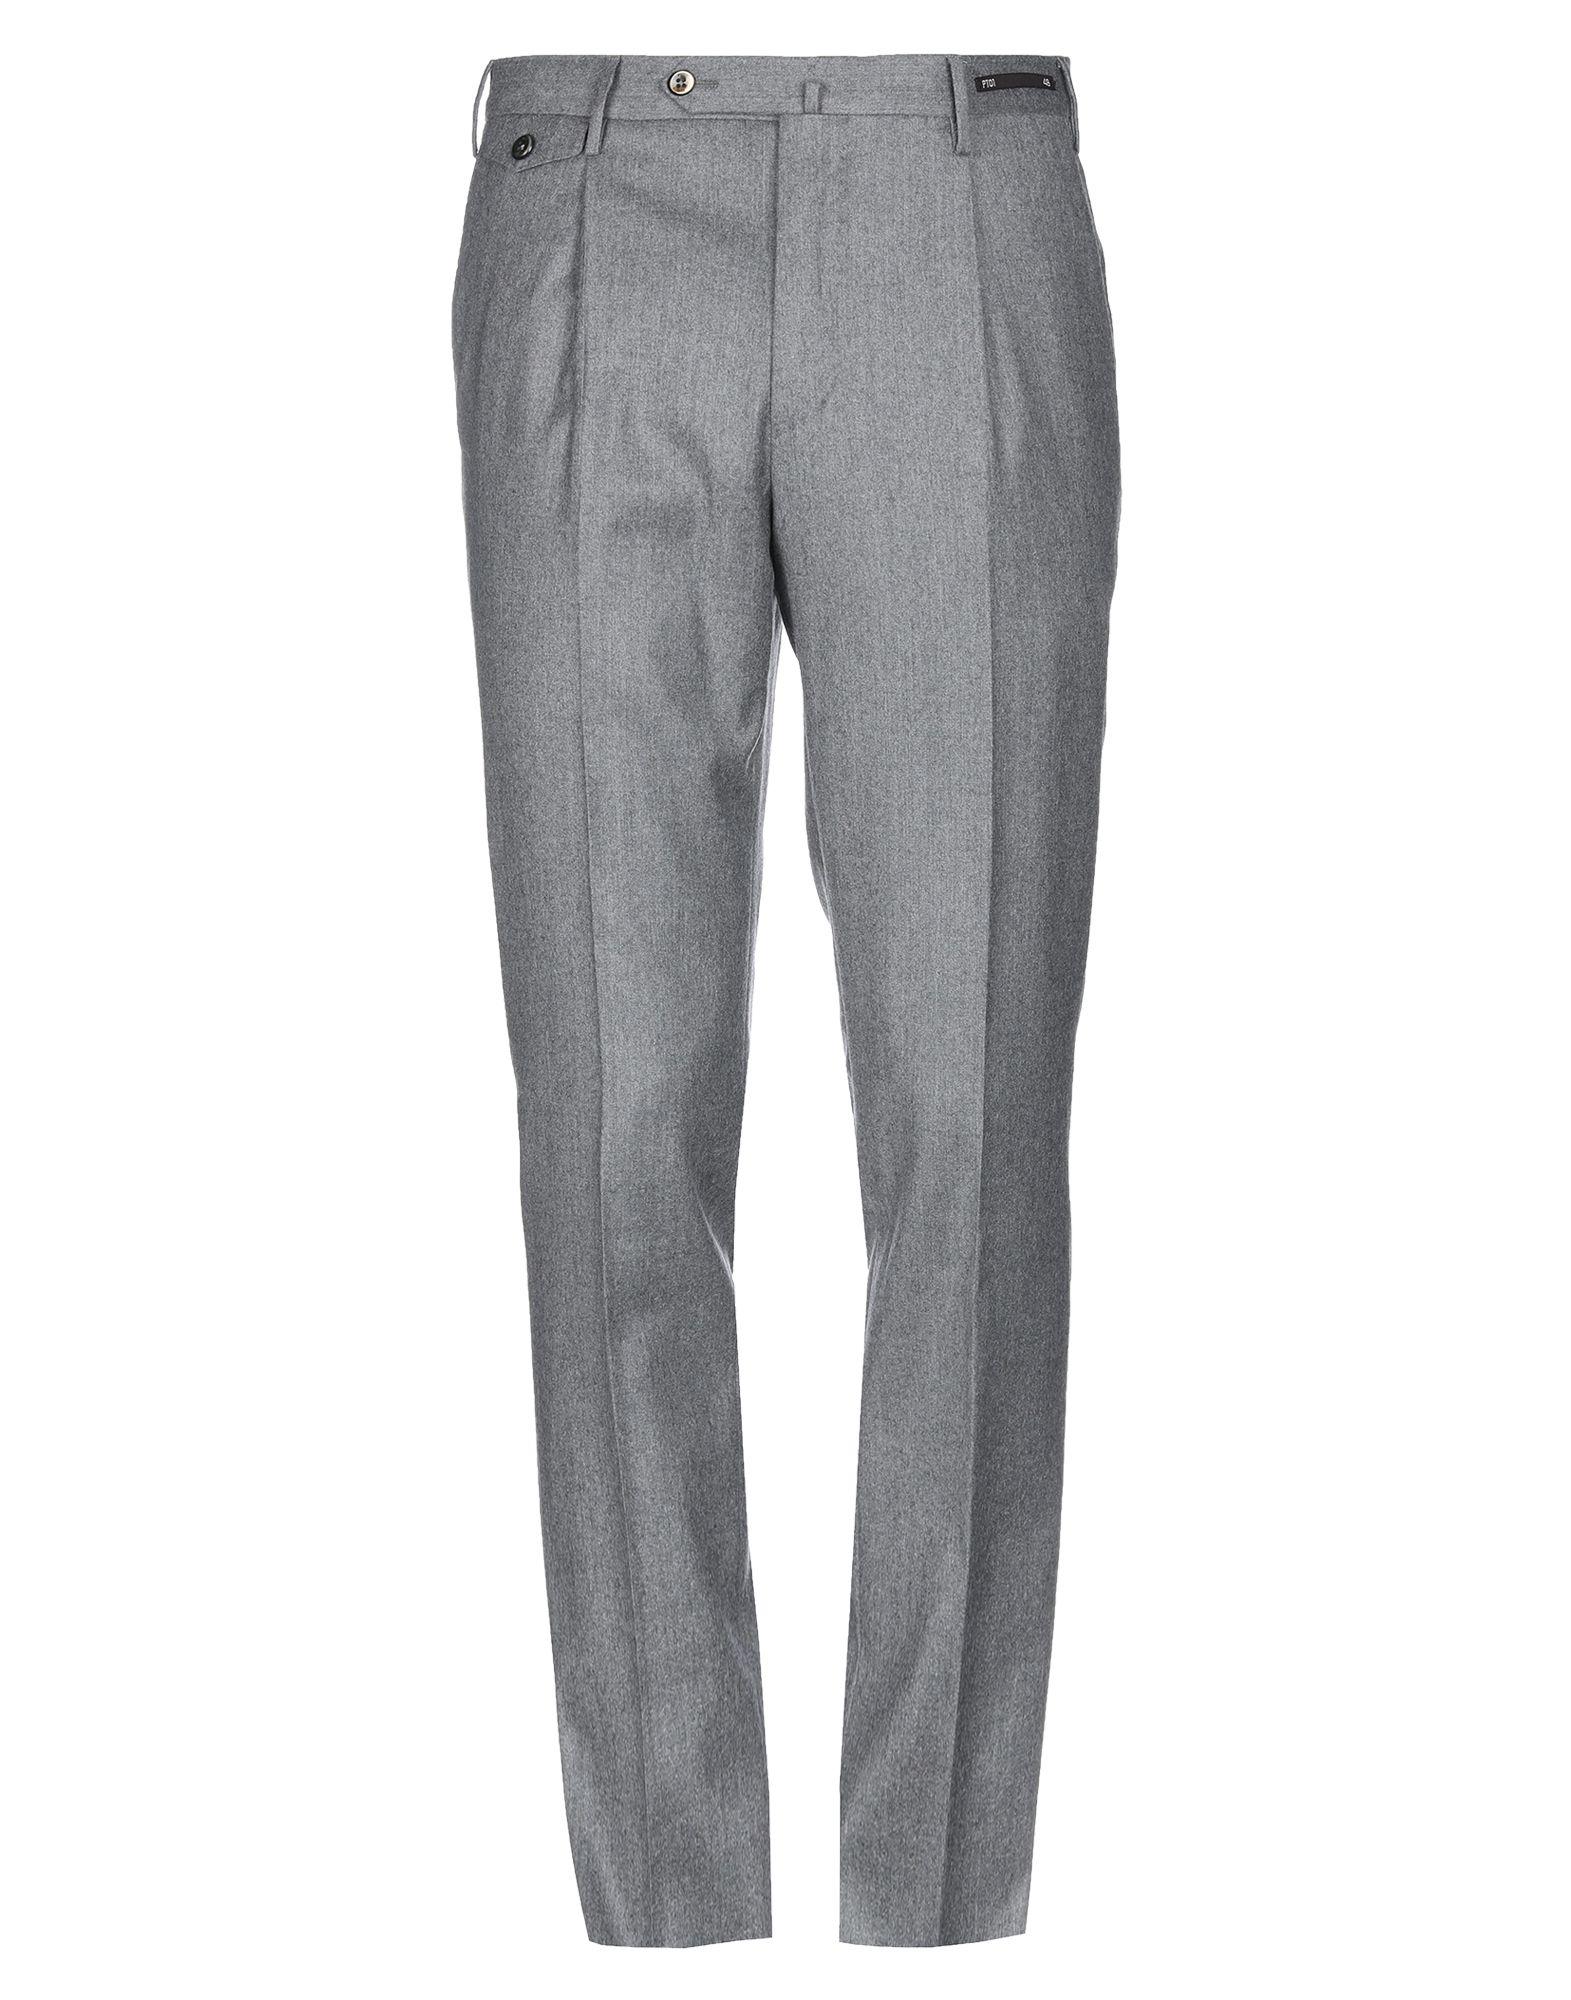 PT01 Flannel Casual Pants in Grey (Gray) for Men - Lyst